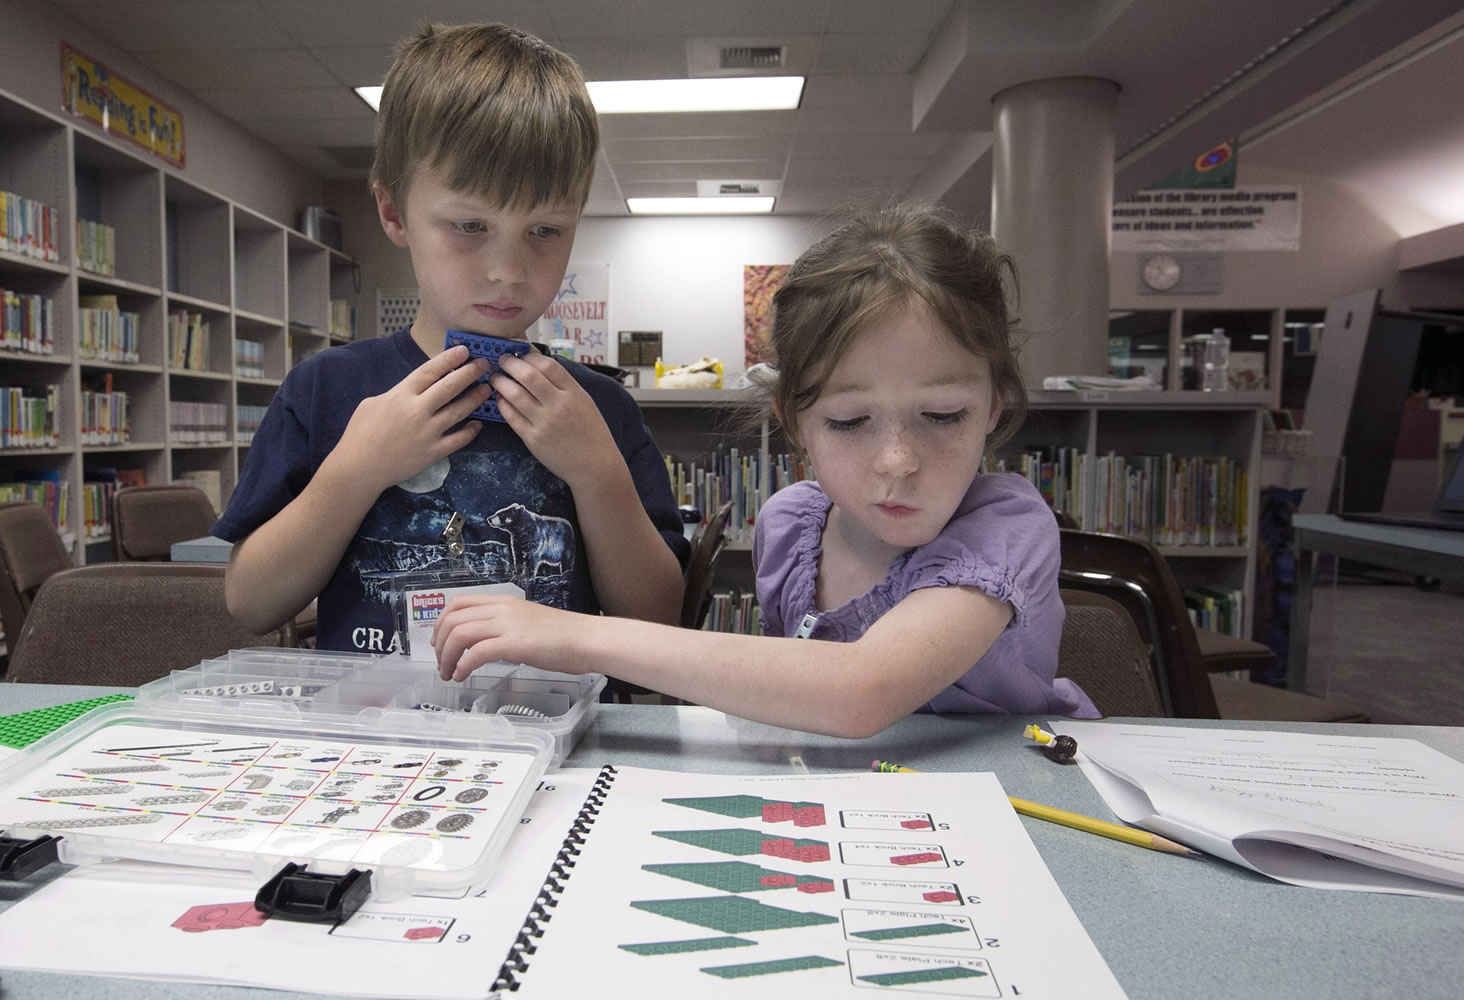 Students Joshua Whitney, 6, and Alison Dorn, 7, figure out how to assemble a seesaw from Legos on July 22 at Roosevelt Elementary in Yakima.